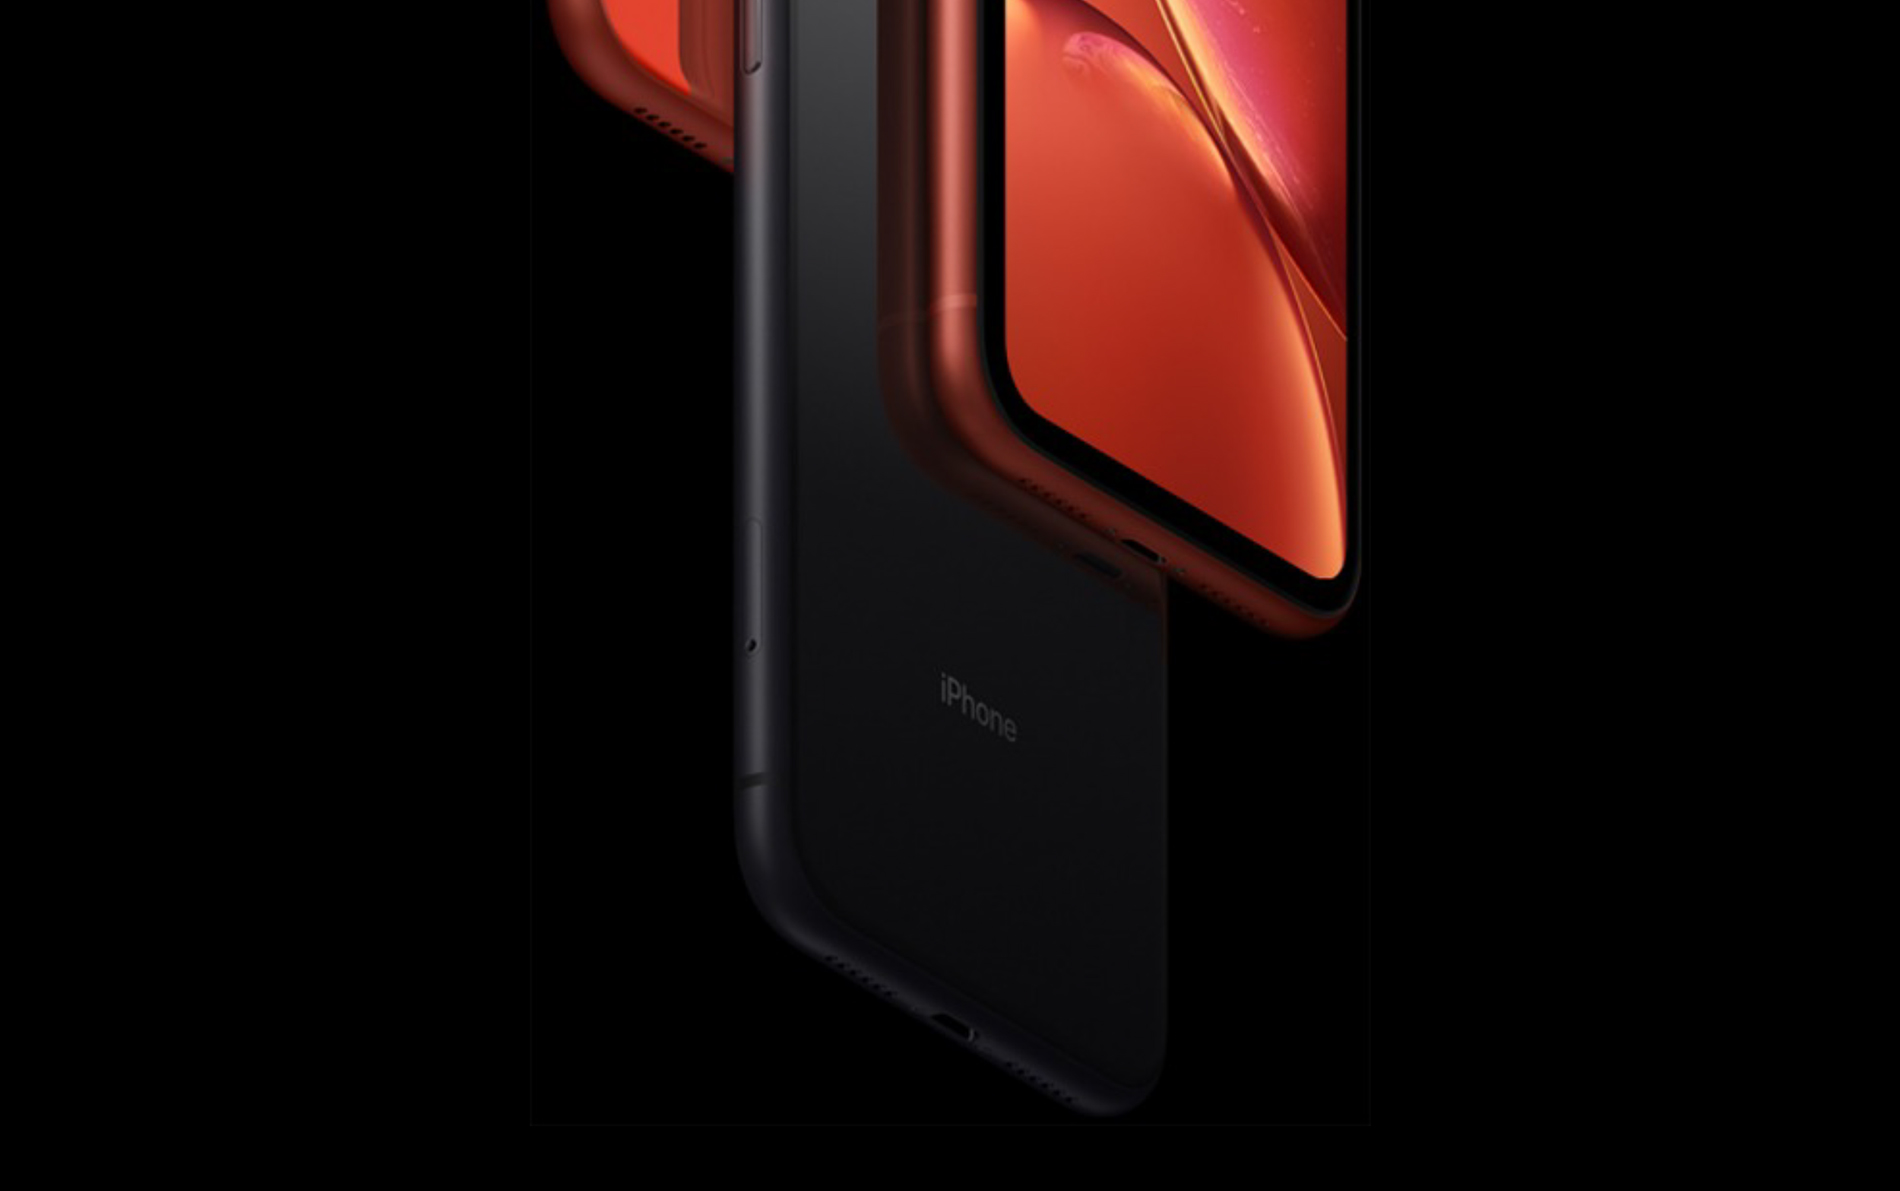 iPhone XR. Brilliant. In every way.